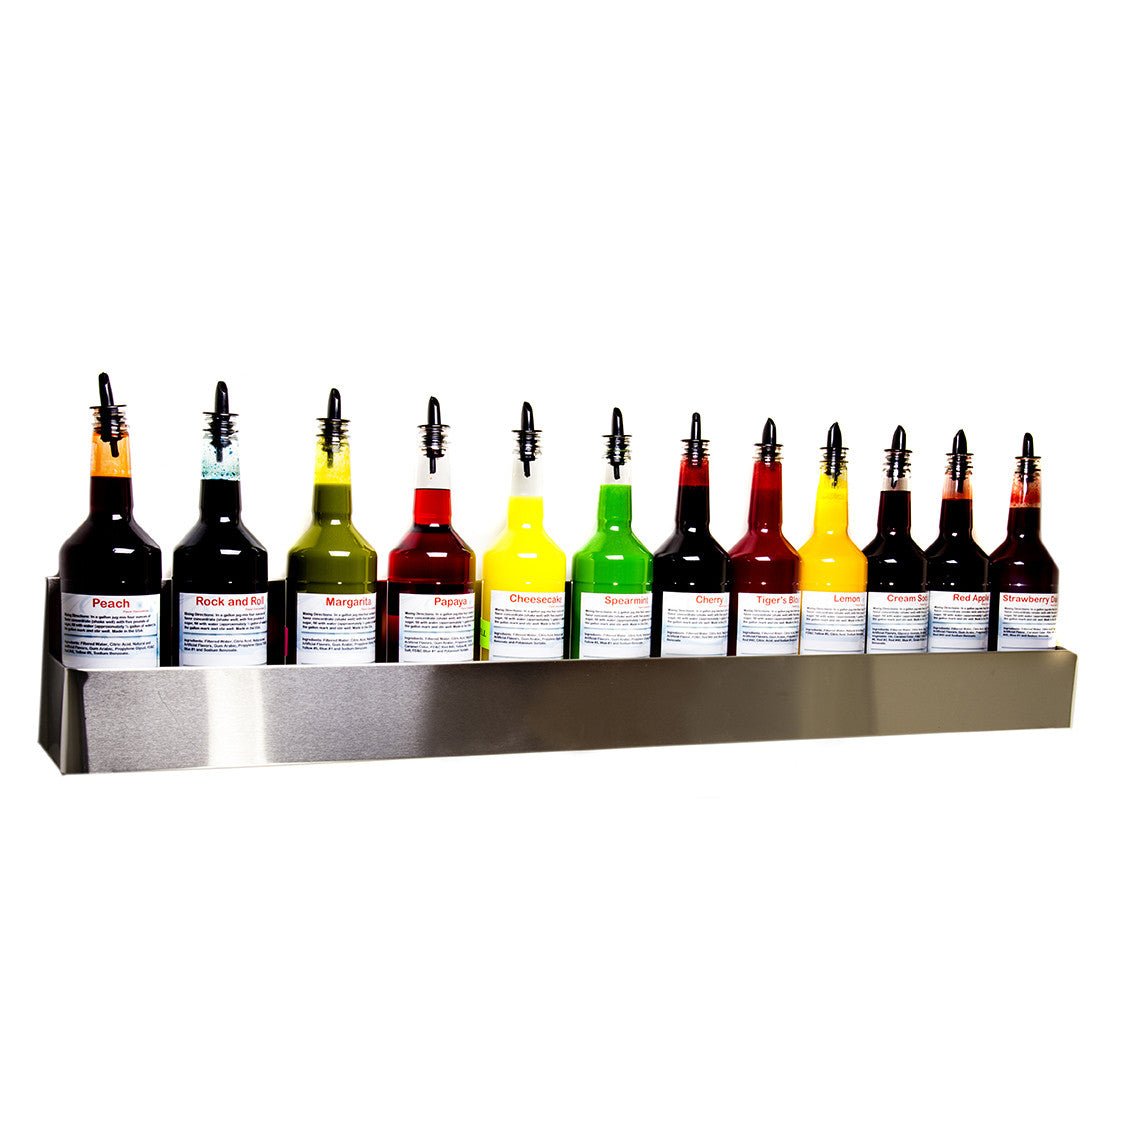 Stainless Steel Bottle Rack (Wall Mount) 42 Inch Single Hold - Hypothermias.com